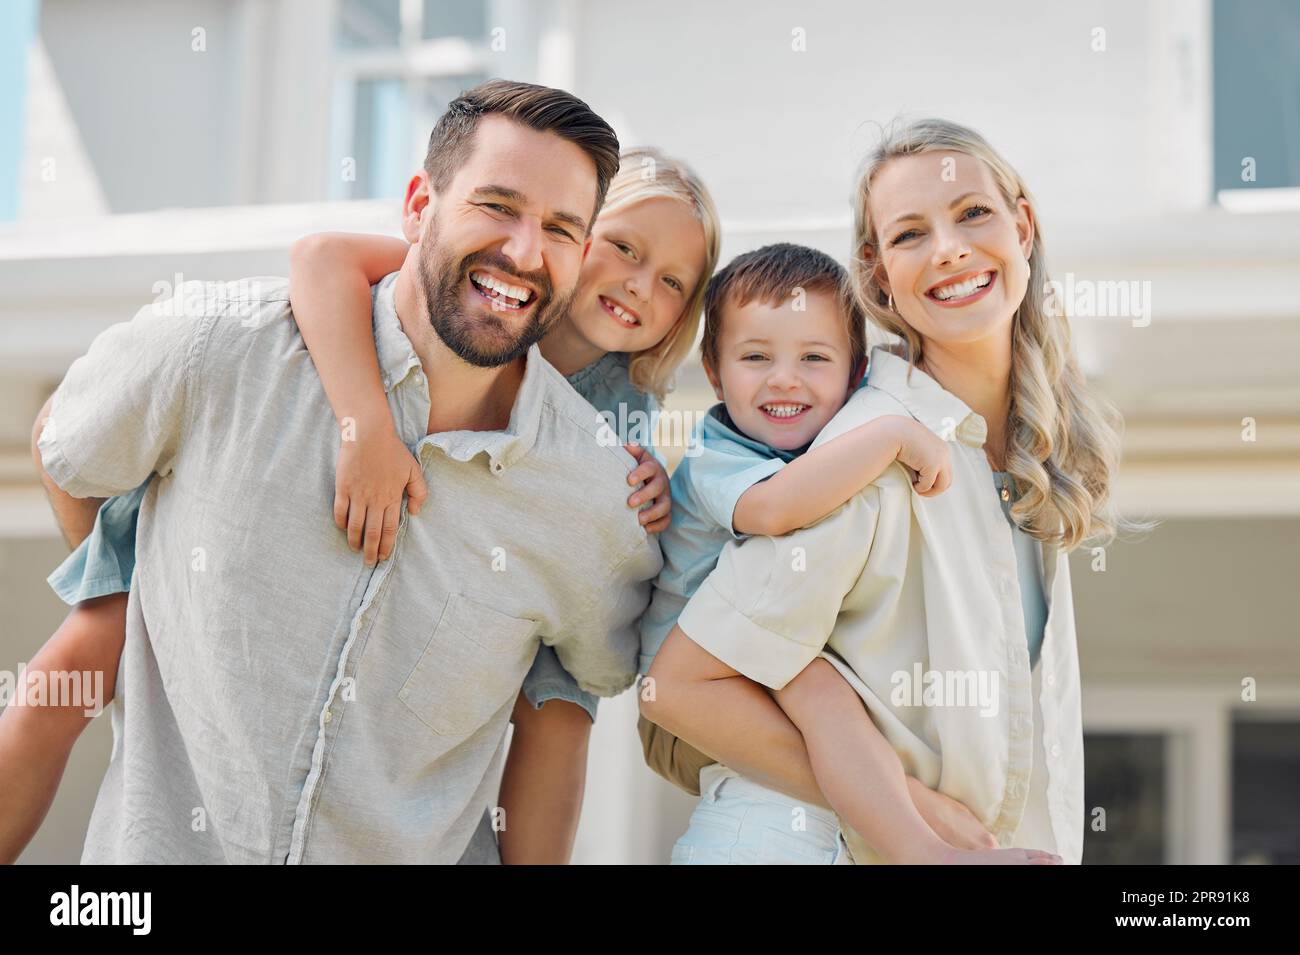 Portrait of happy parents giving their little children piggyback rides outside in a garden. Smiling caucasian couple bonding with their adorable son and daughter in the backyard. Playful kids enjoying Stock Photo